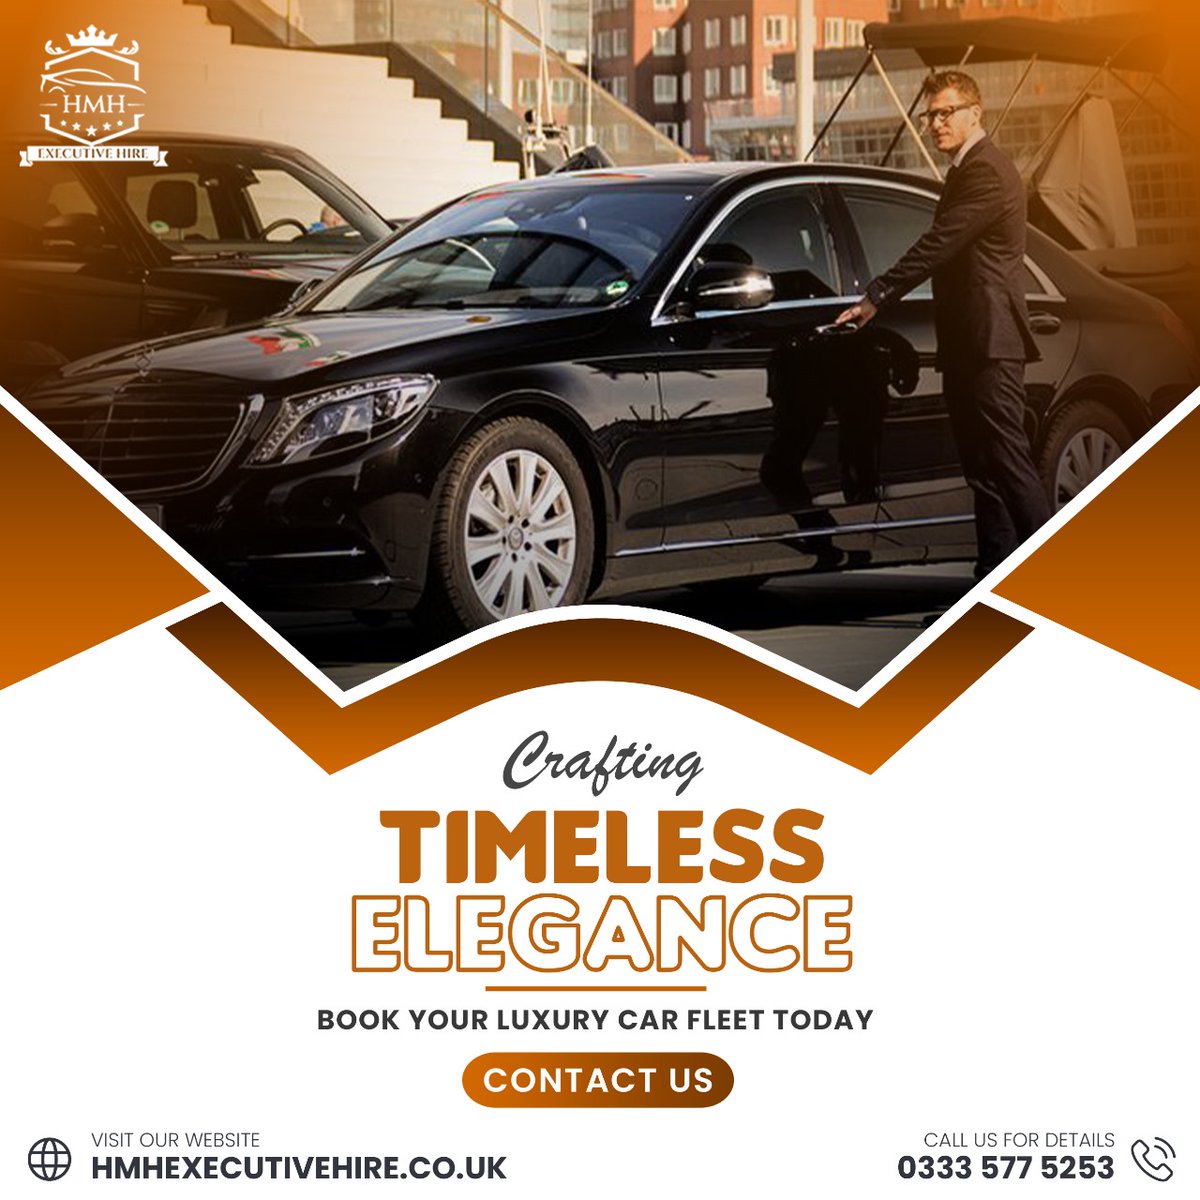 Elevate your journey with HMH Executive Hire! 🚗✨ Immerse yourself in the art of crafting timeless elegance with our exclusive fleet. Where every ride is a masterpiece. #TimelessElegance #HMHExecutiveHire #LuxuryTravel